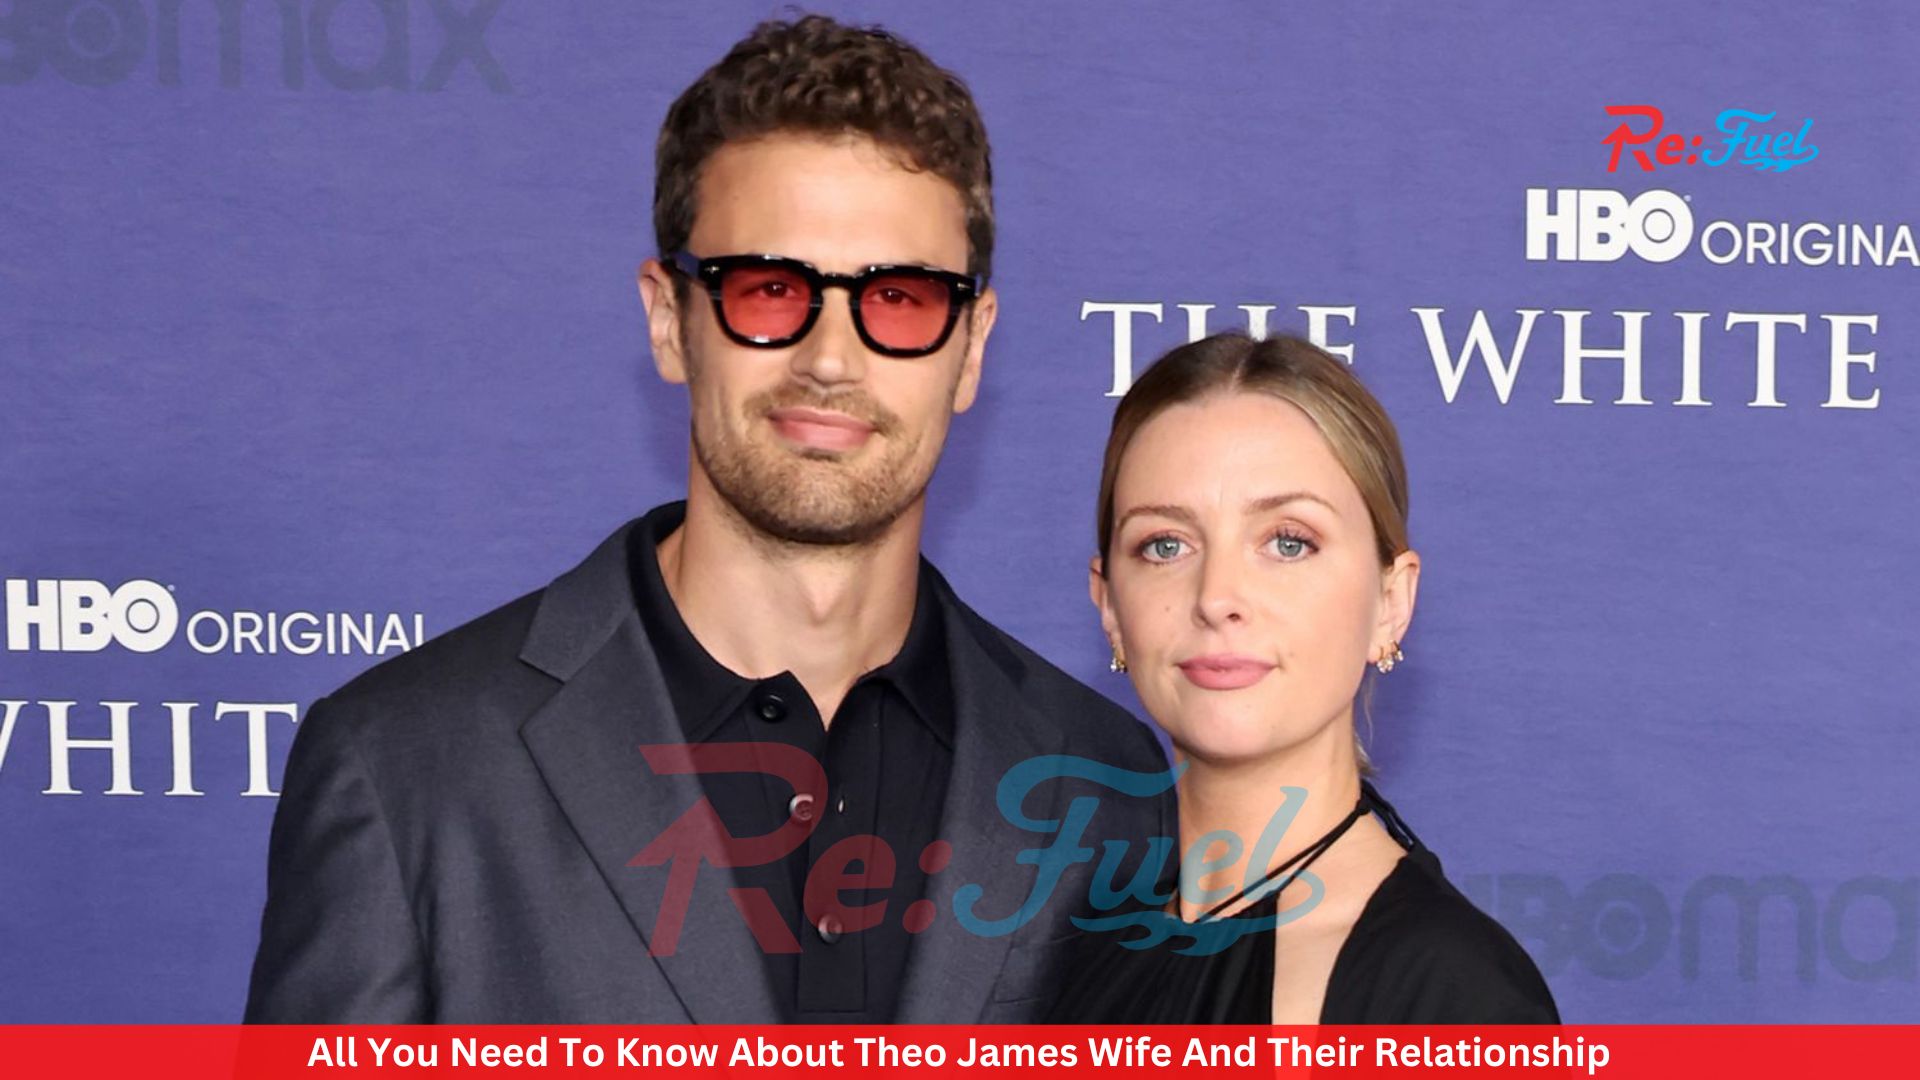 All You Need To Know About Theo James' Wife And Their Relationship